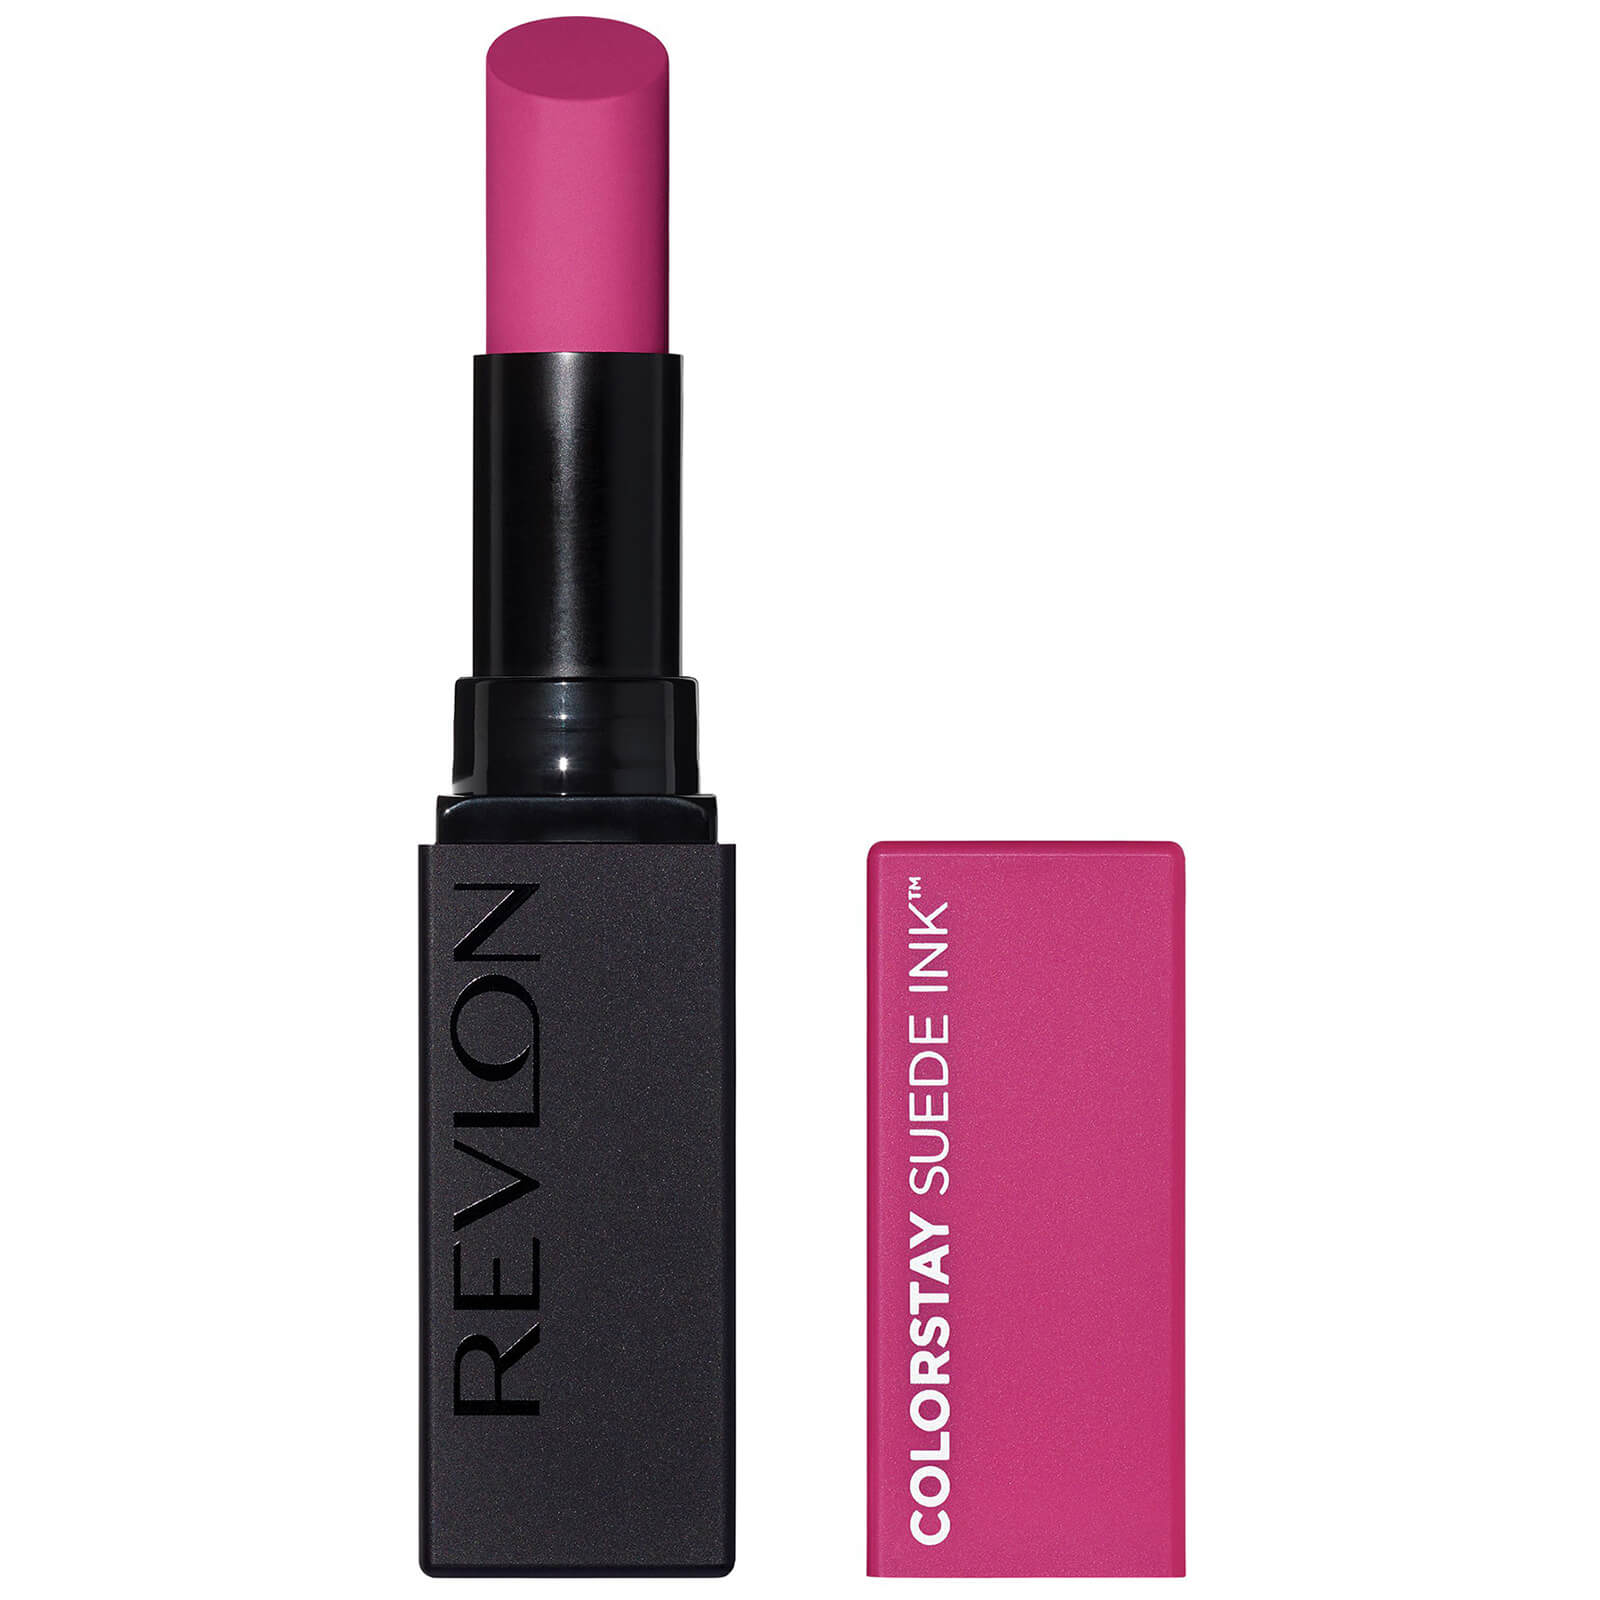 Shop Revlon Colorstay Suede Ink Lipstick 2.55g (various Shades) - Tunnel Vision